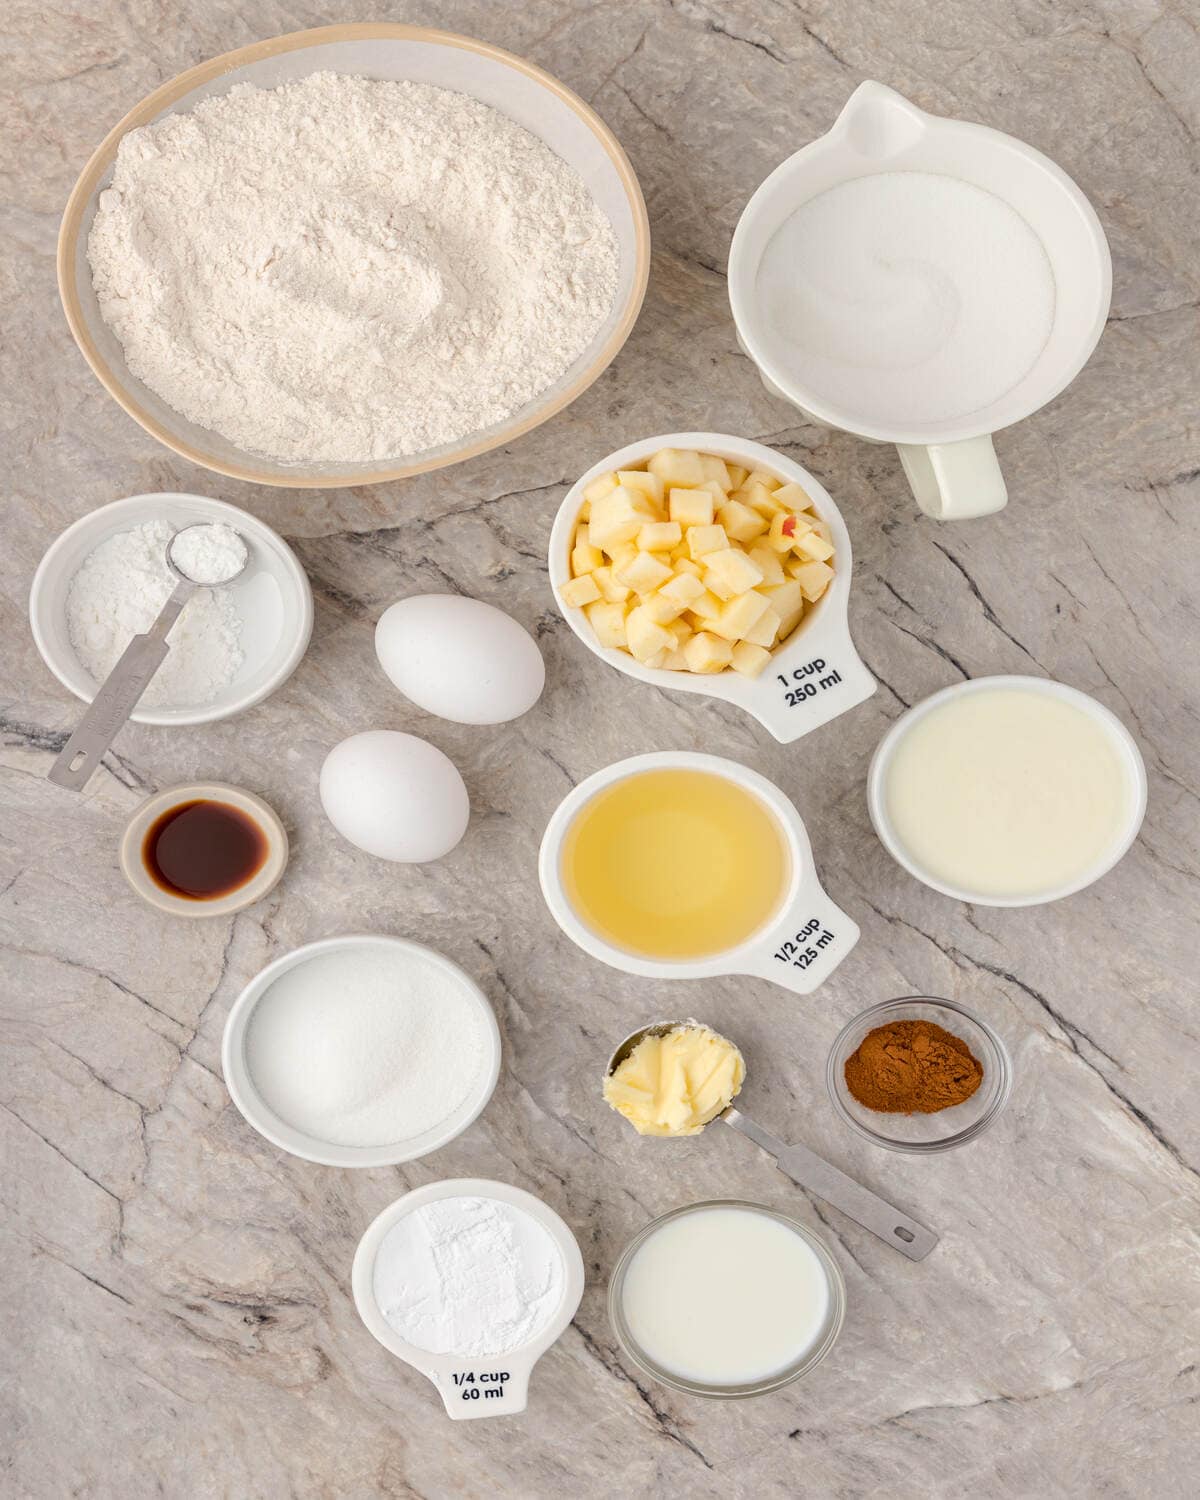 Ingredients for baking arranged on a marble surface.